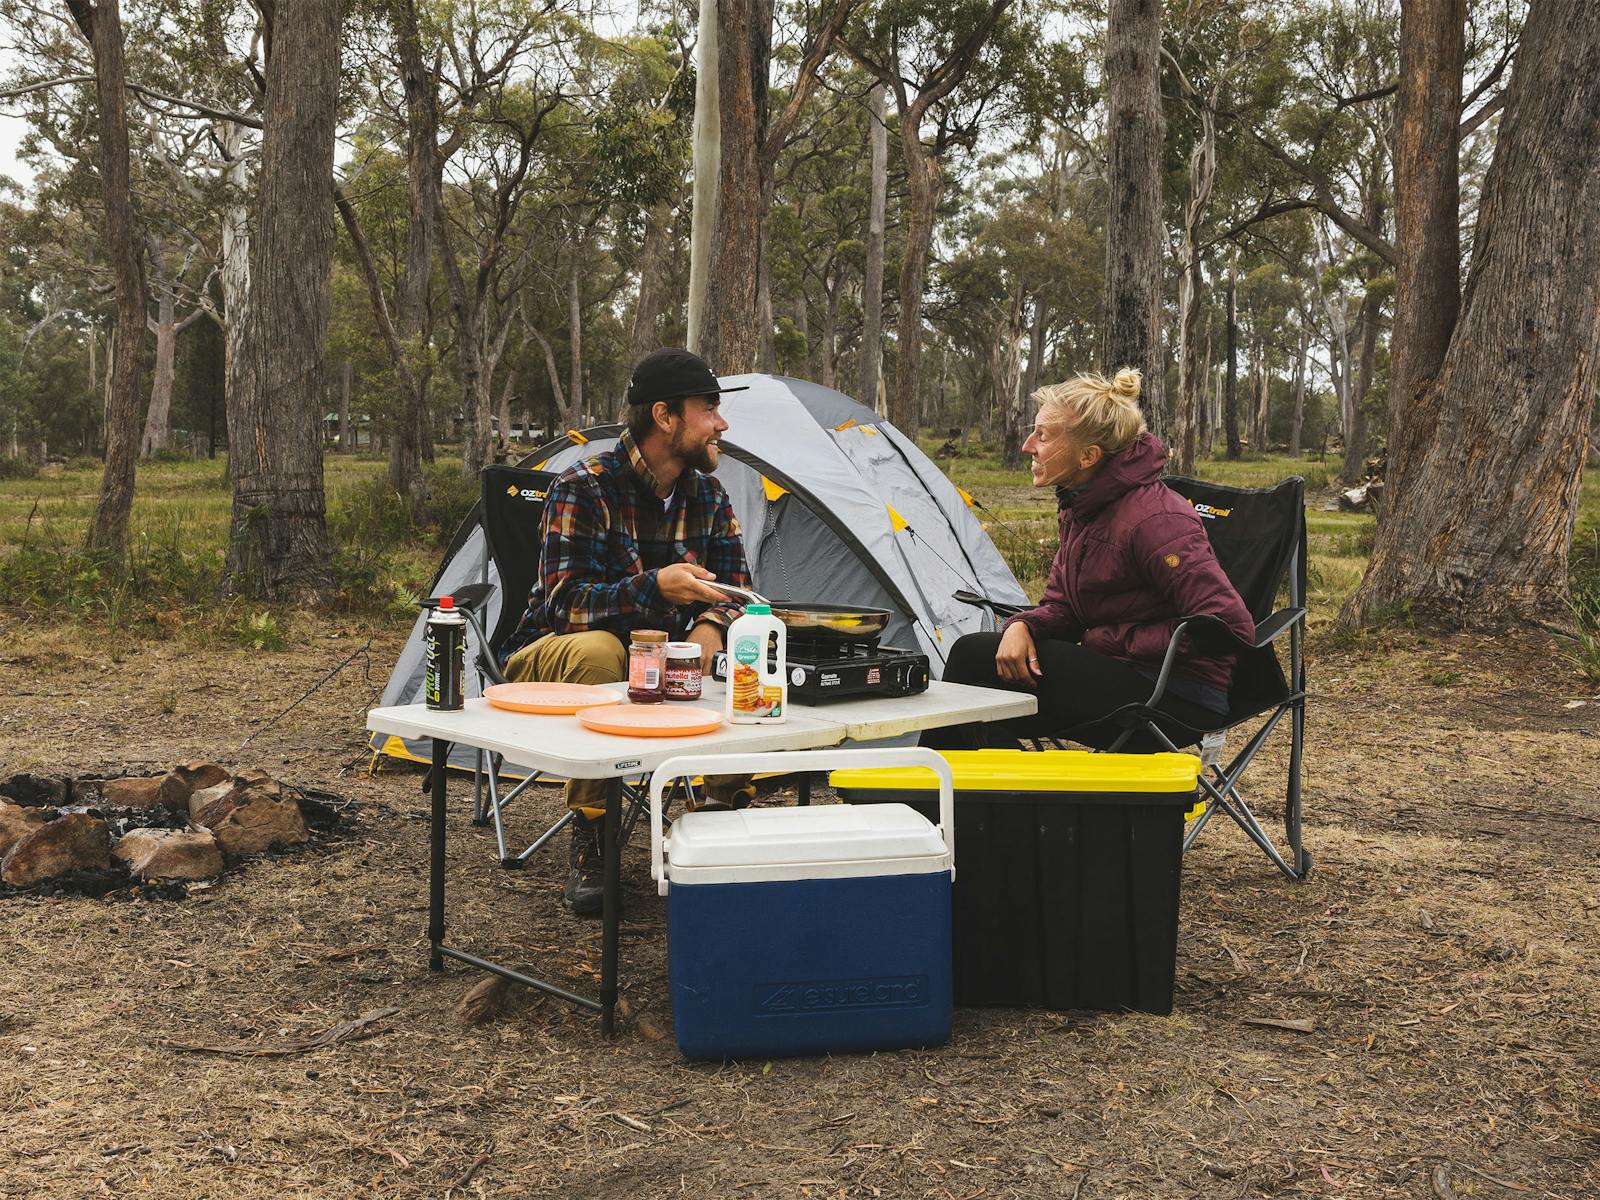 Rent a car from Hobart, fully equipped with camping gear  and get set to explore Tasmania freely